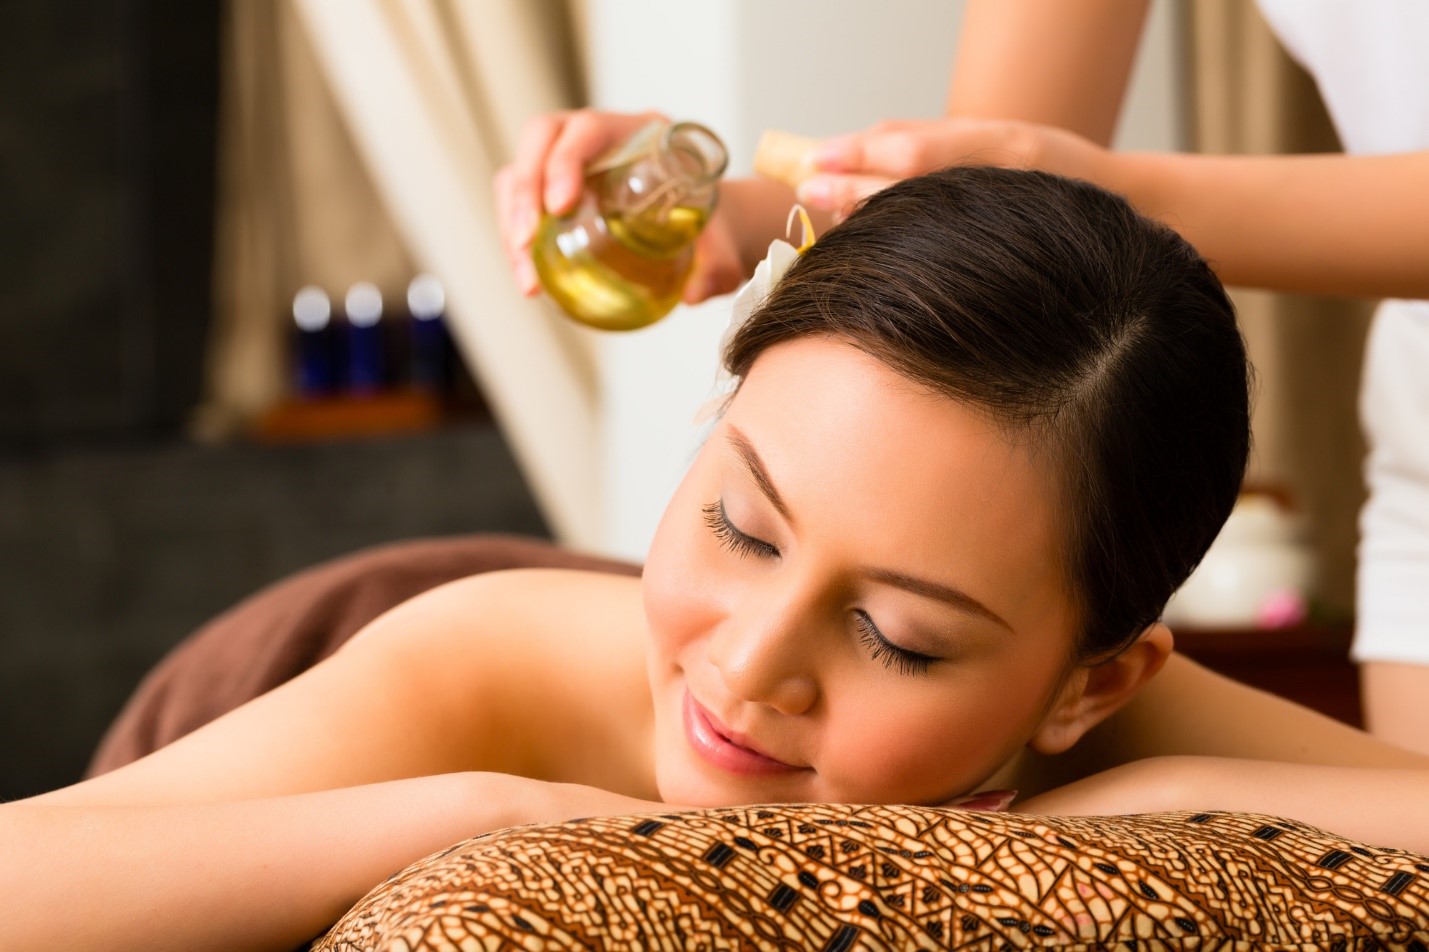 Unwind and Rejuvenate at Moon Day SPA - Your Oasis of Tranquility in Alabama